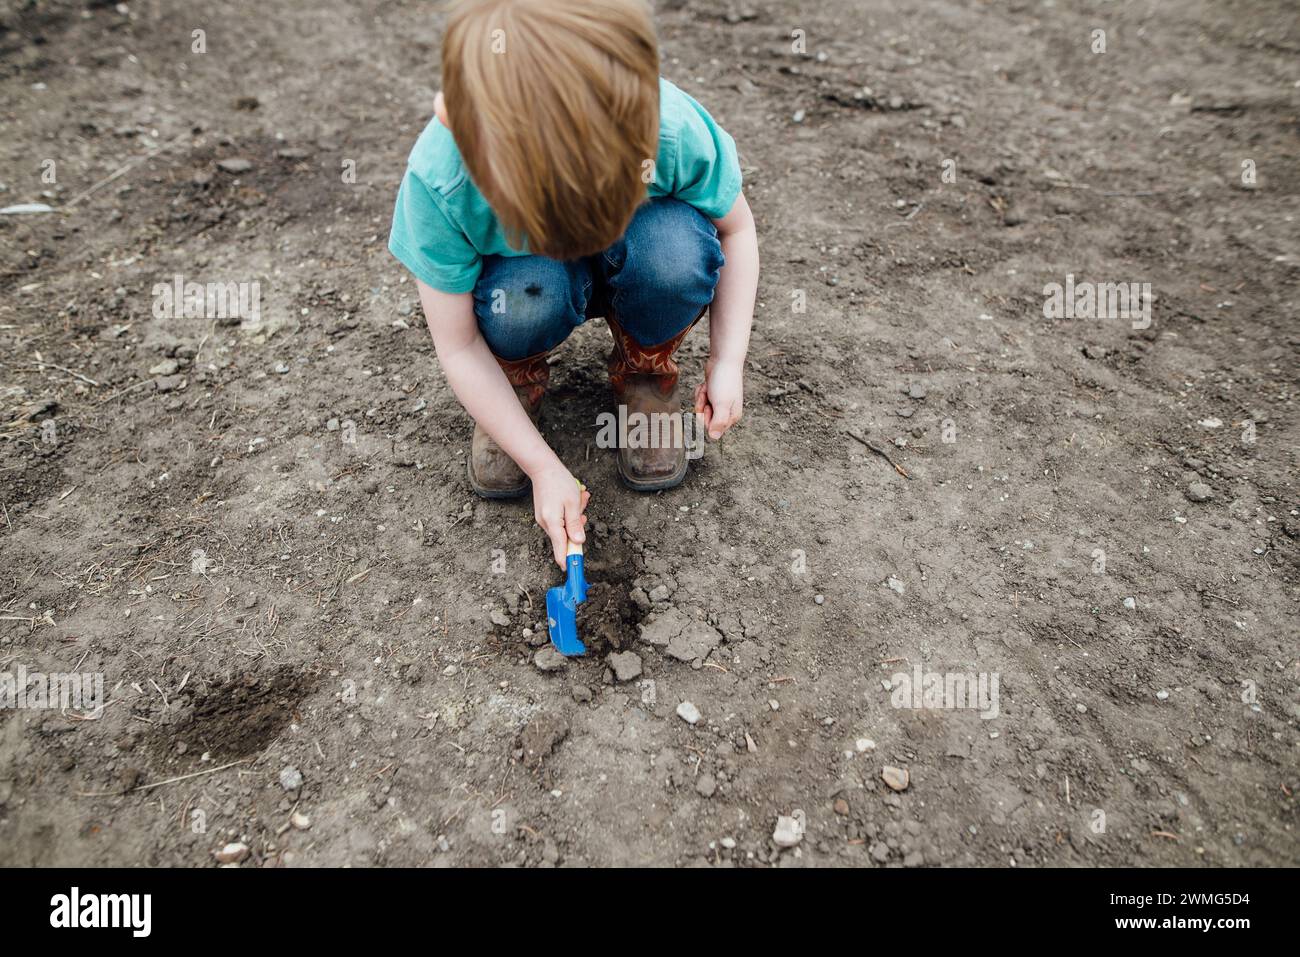 Overhead view of young boy squatting in dirt yard using a shovel Stock Photo